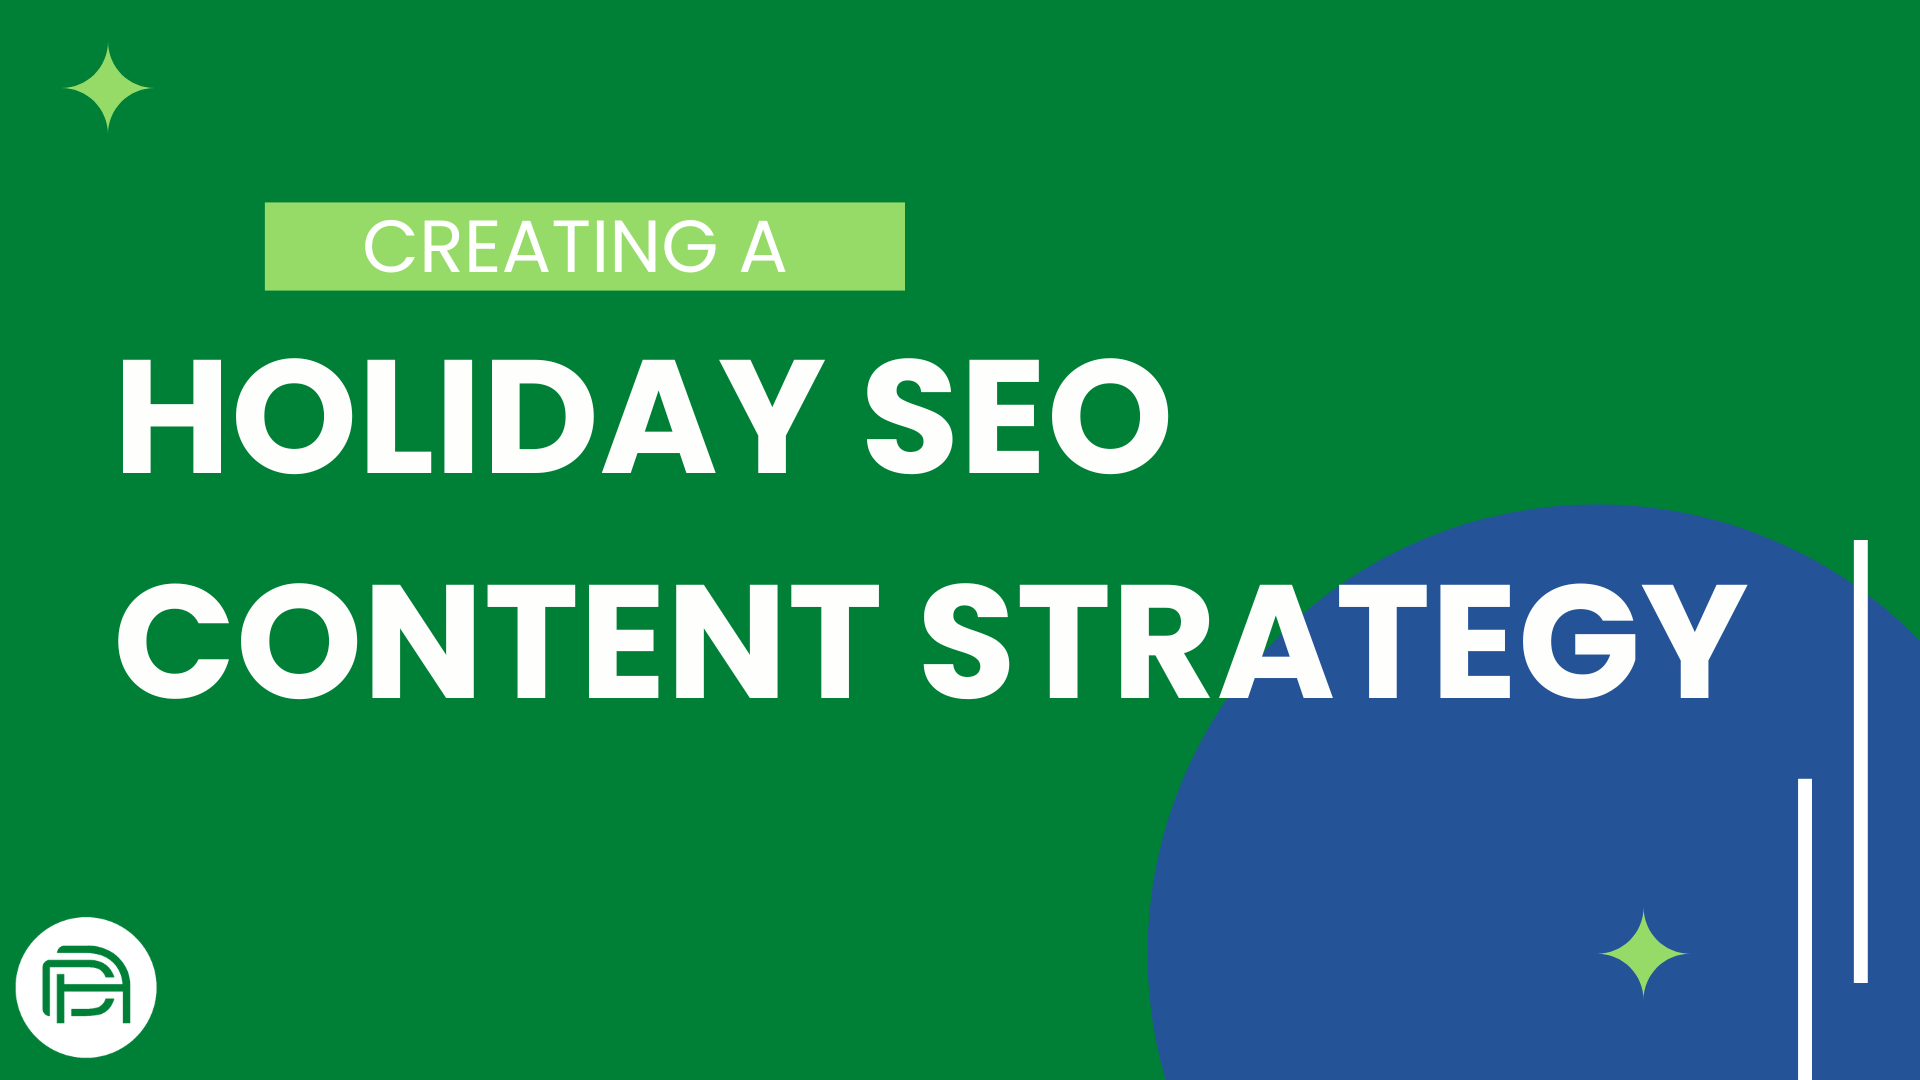 Creating a Holiday SEO Content Strategy